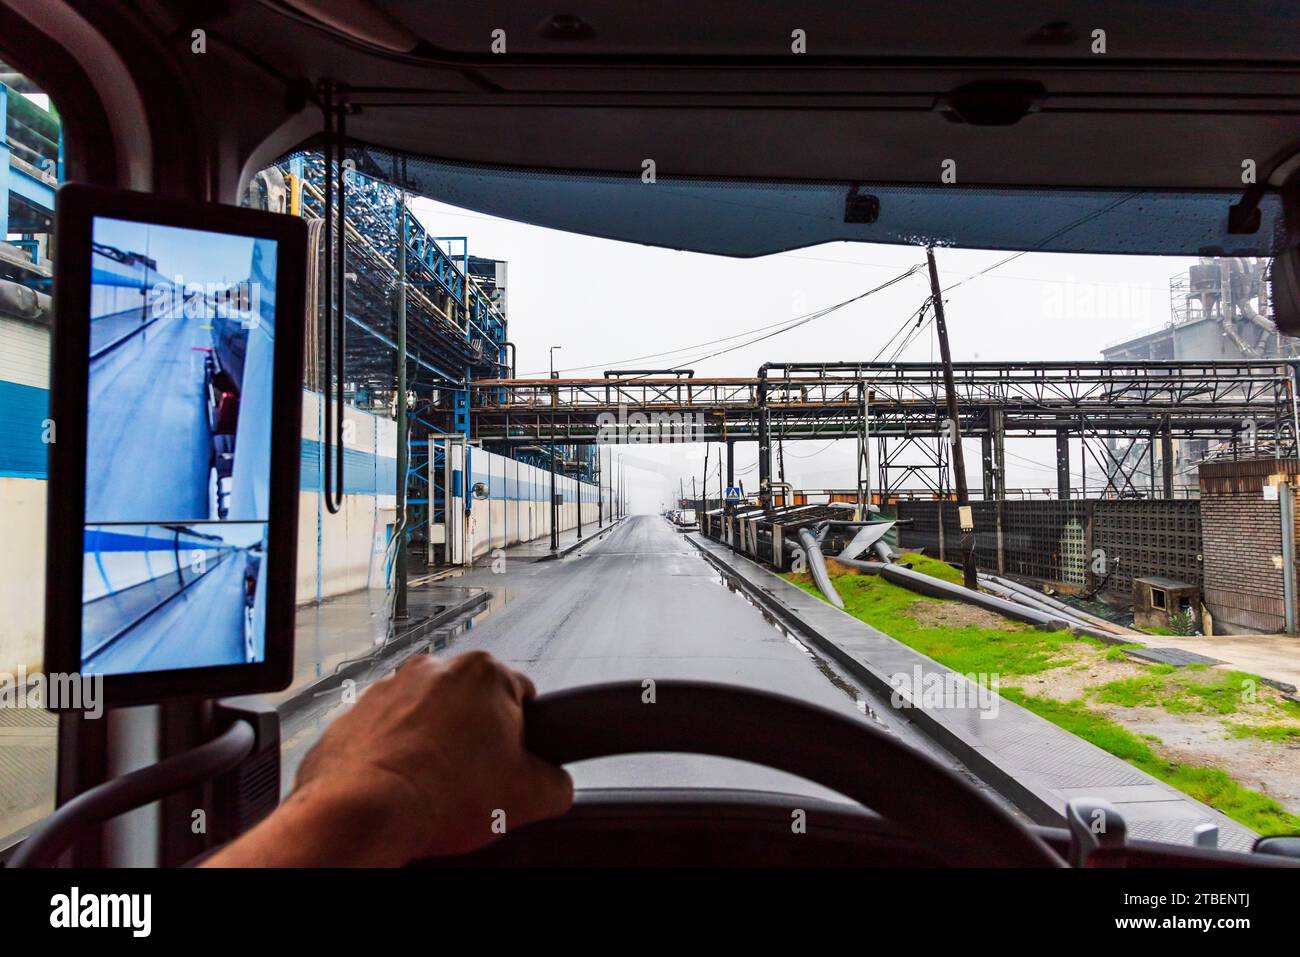 View from inside a truck of a street in an industrial estate, vehicle with rearview mirror for cameras. Stock Photo